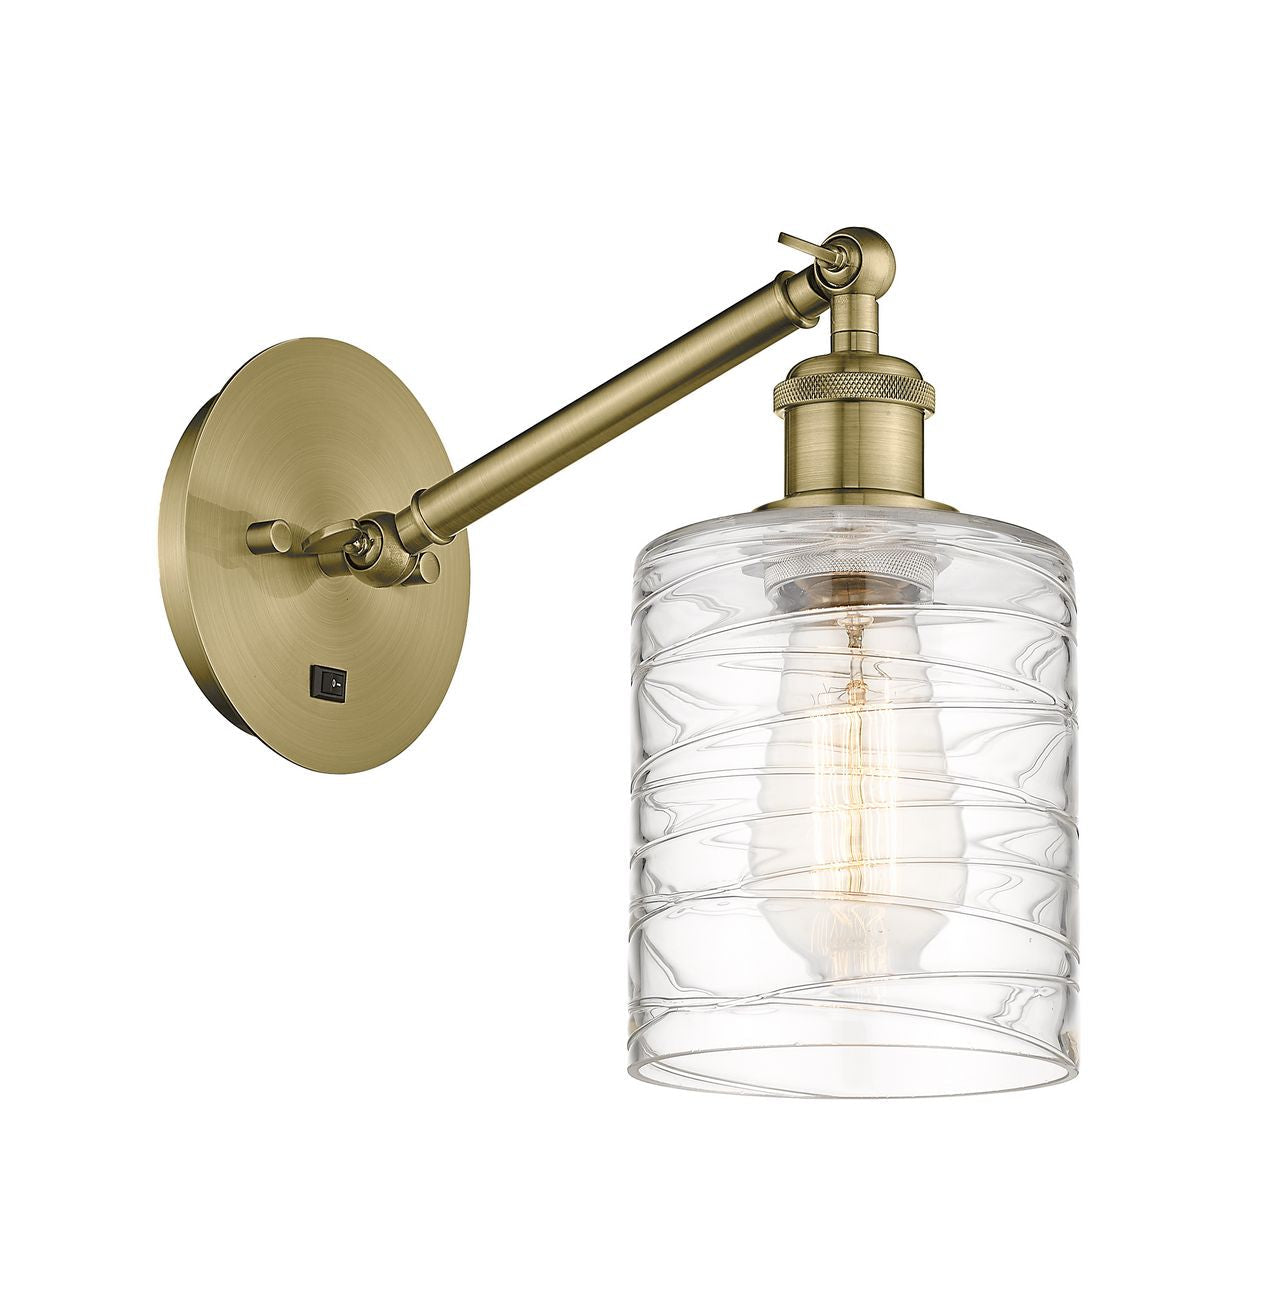 1-Light 5.3" Cobbleskill Sconce - Drum Deco Swirl Glass - Choice of Finish And Incandesent Or LED Bulbs